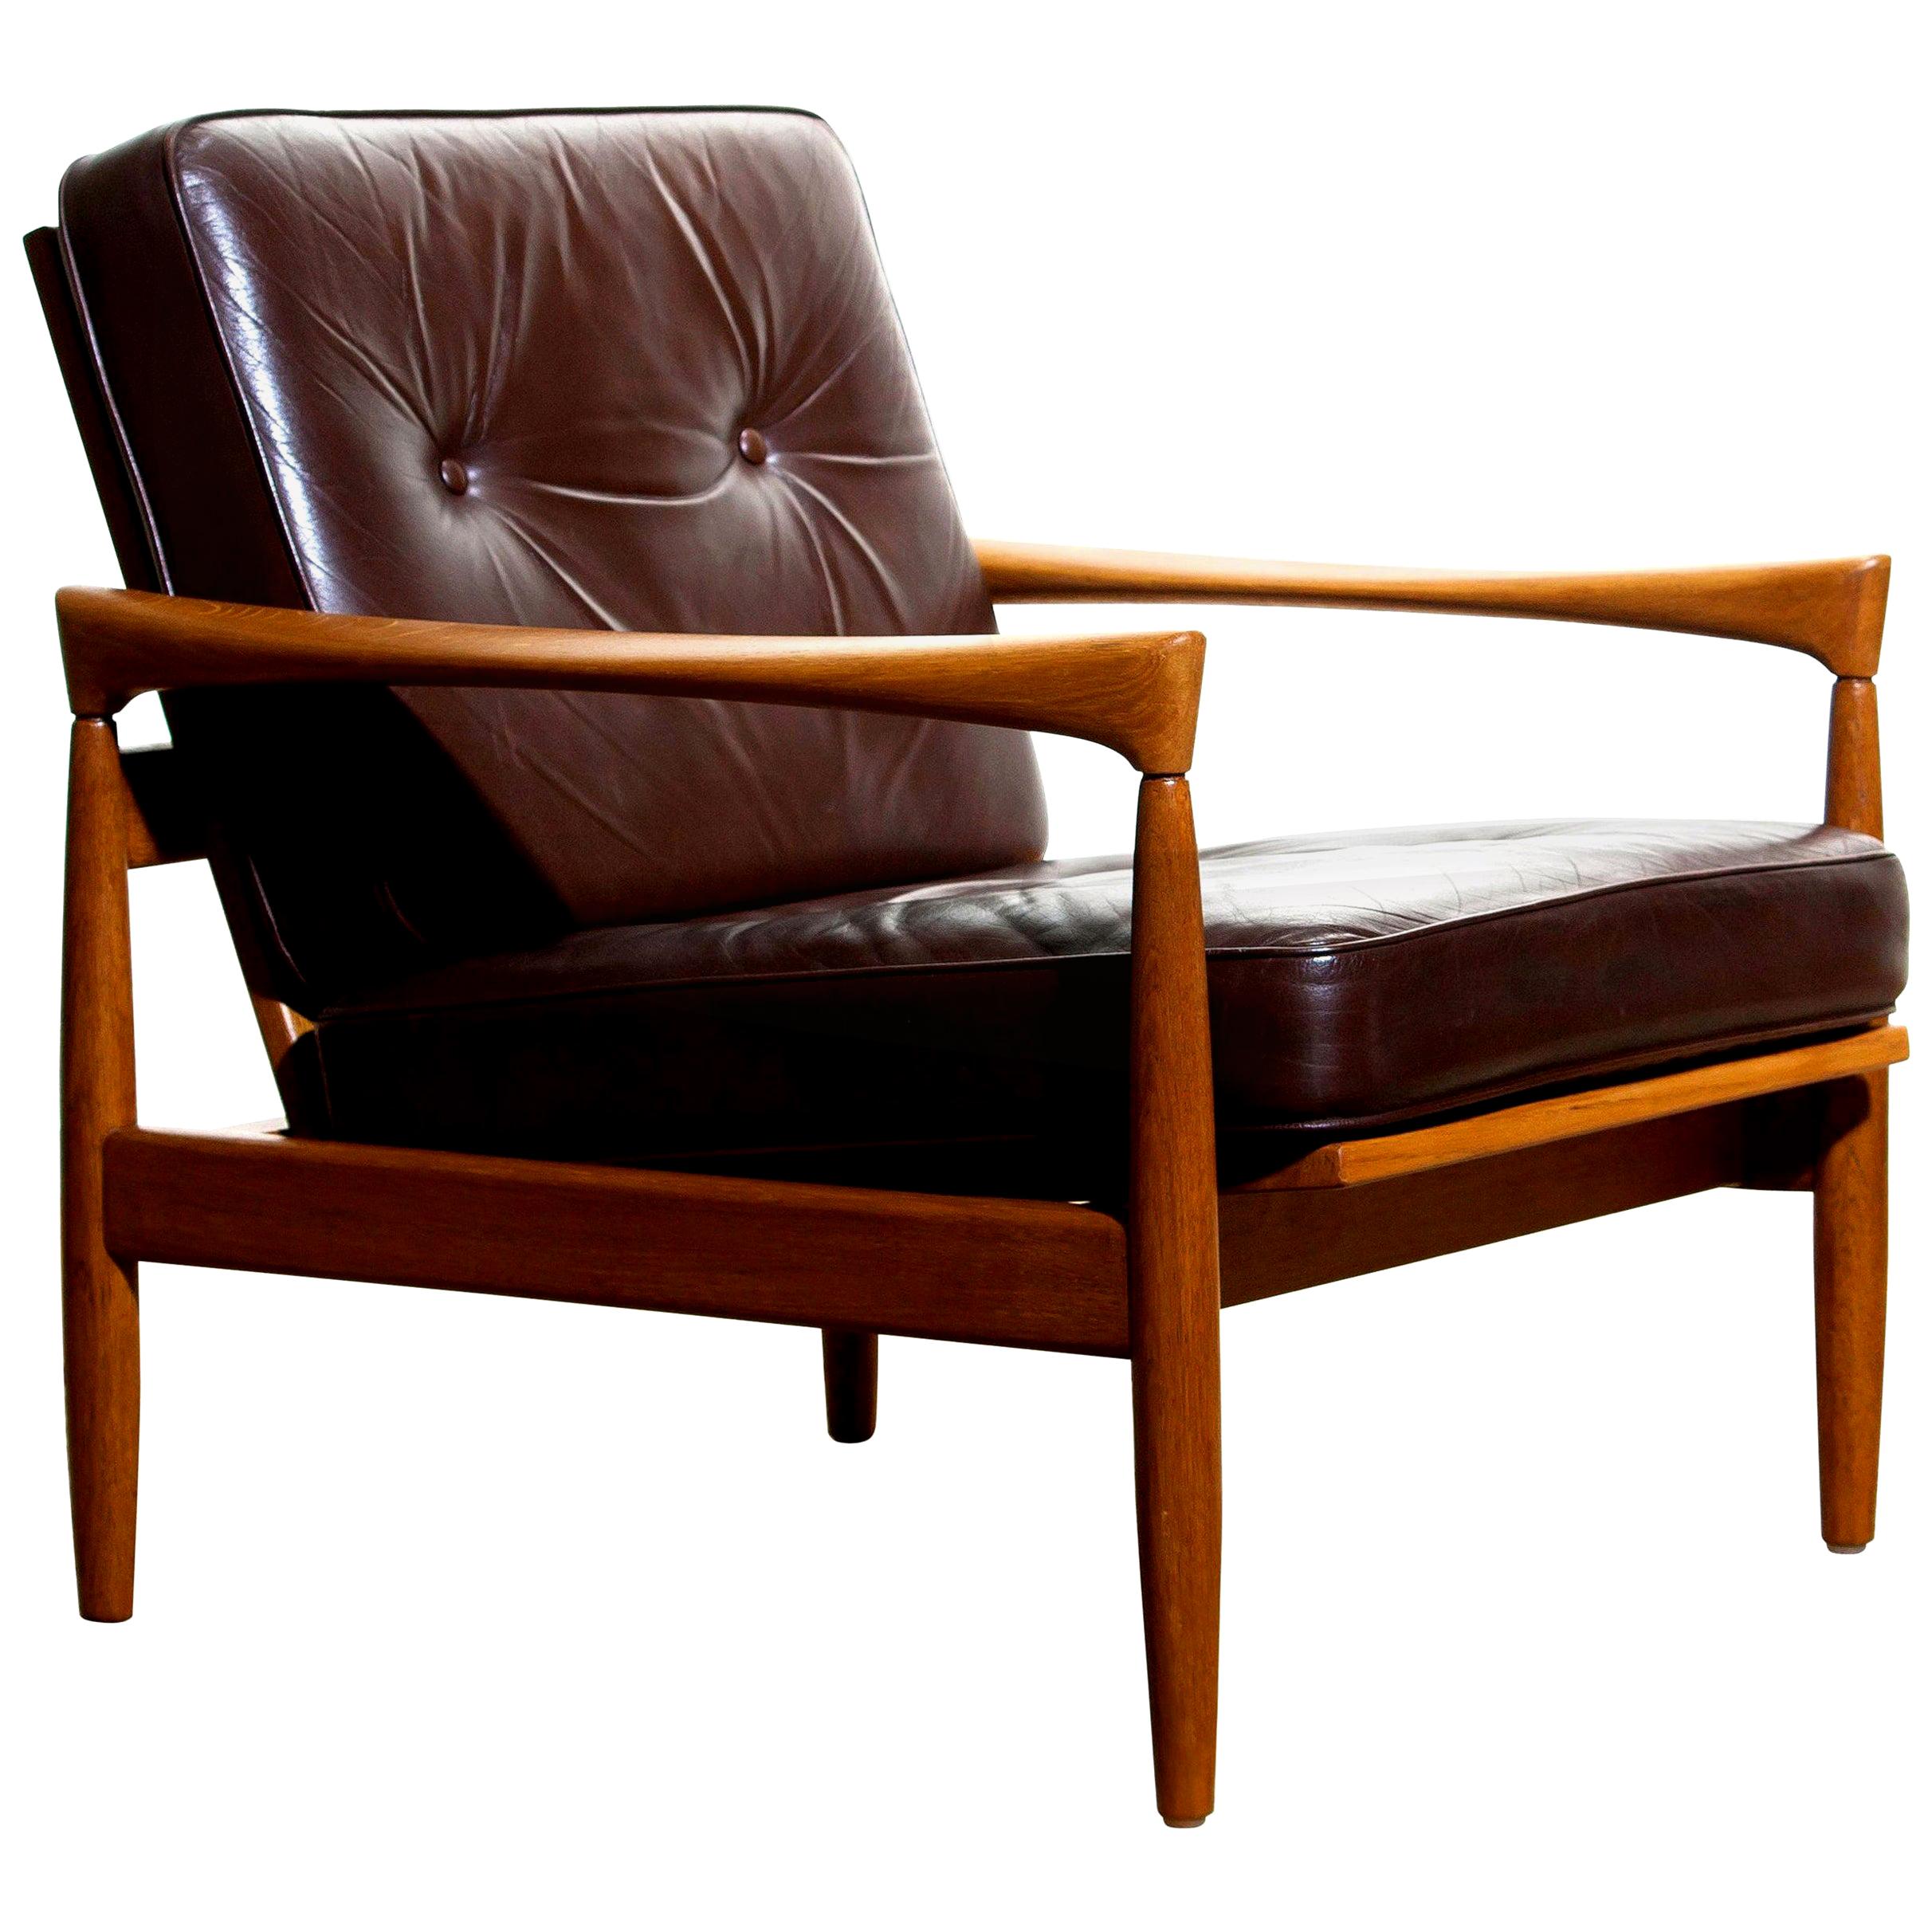 1960s, Oak with Brown Leather Lounge Chair by Erik Wörtz for Bröderna Anderssons